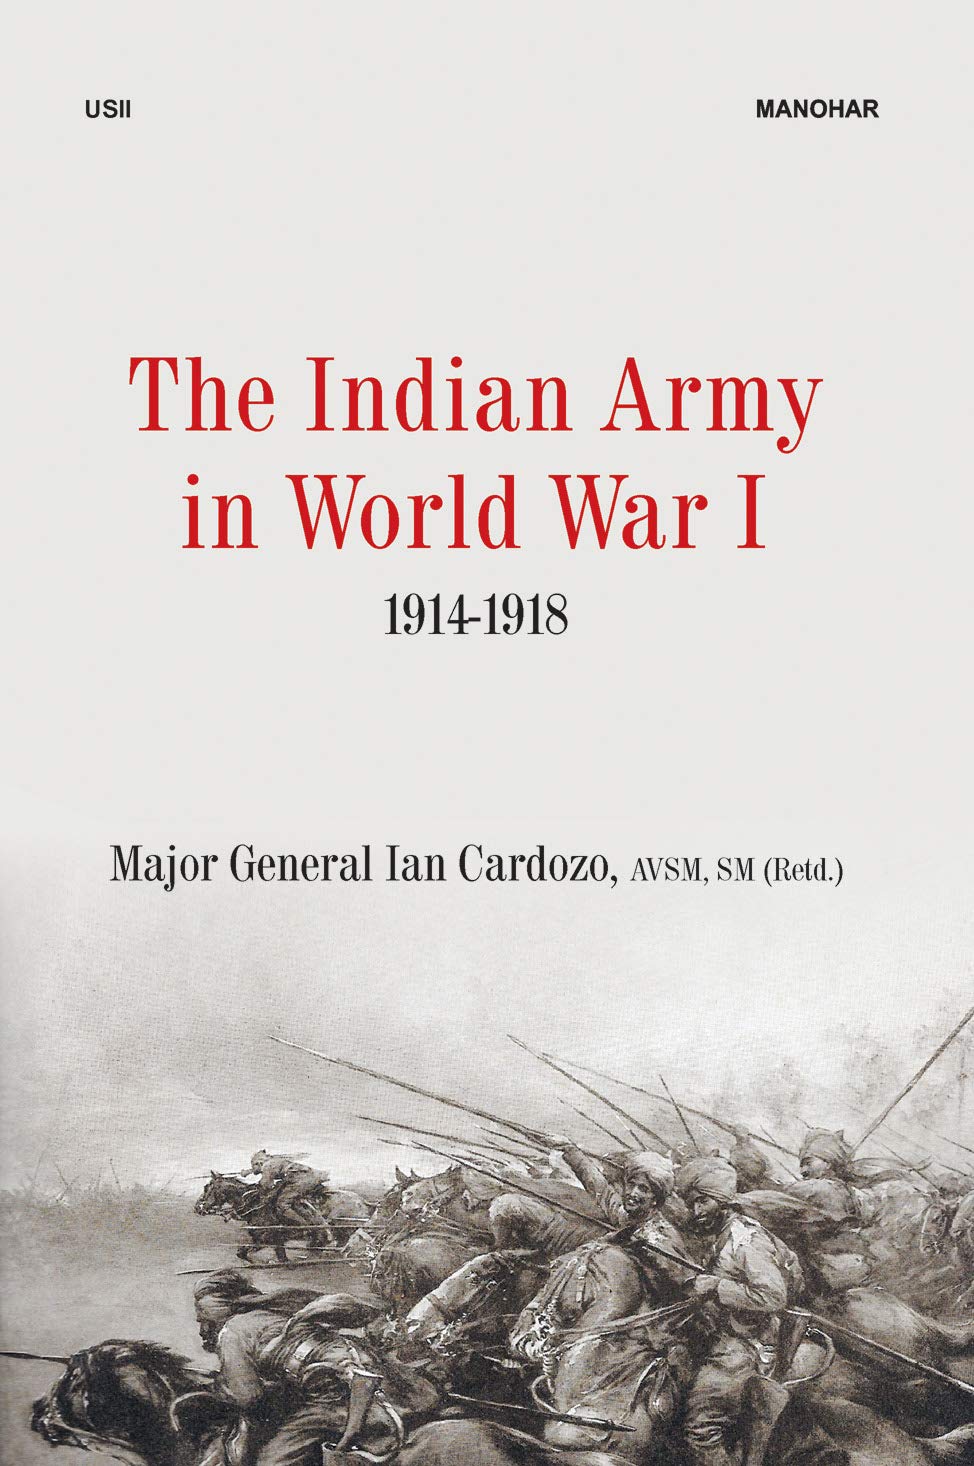 The Indian Army in World War I: 1914-1918